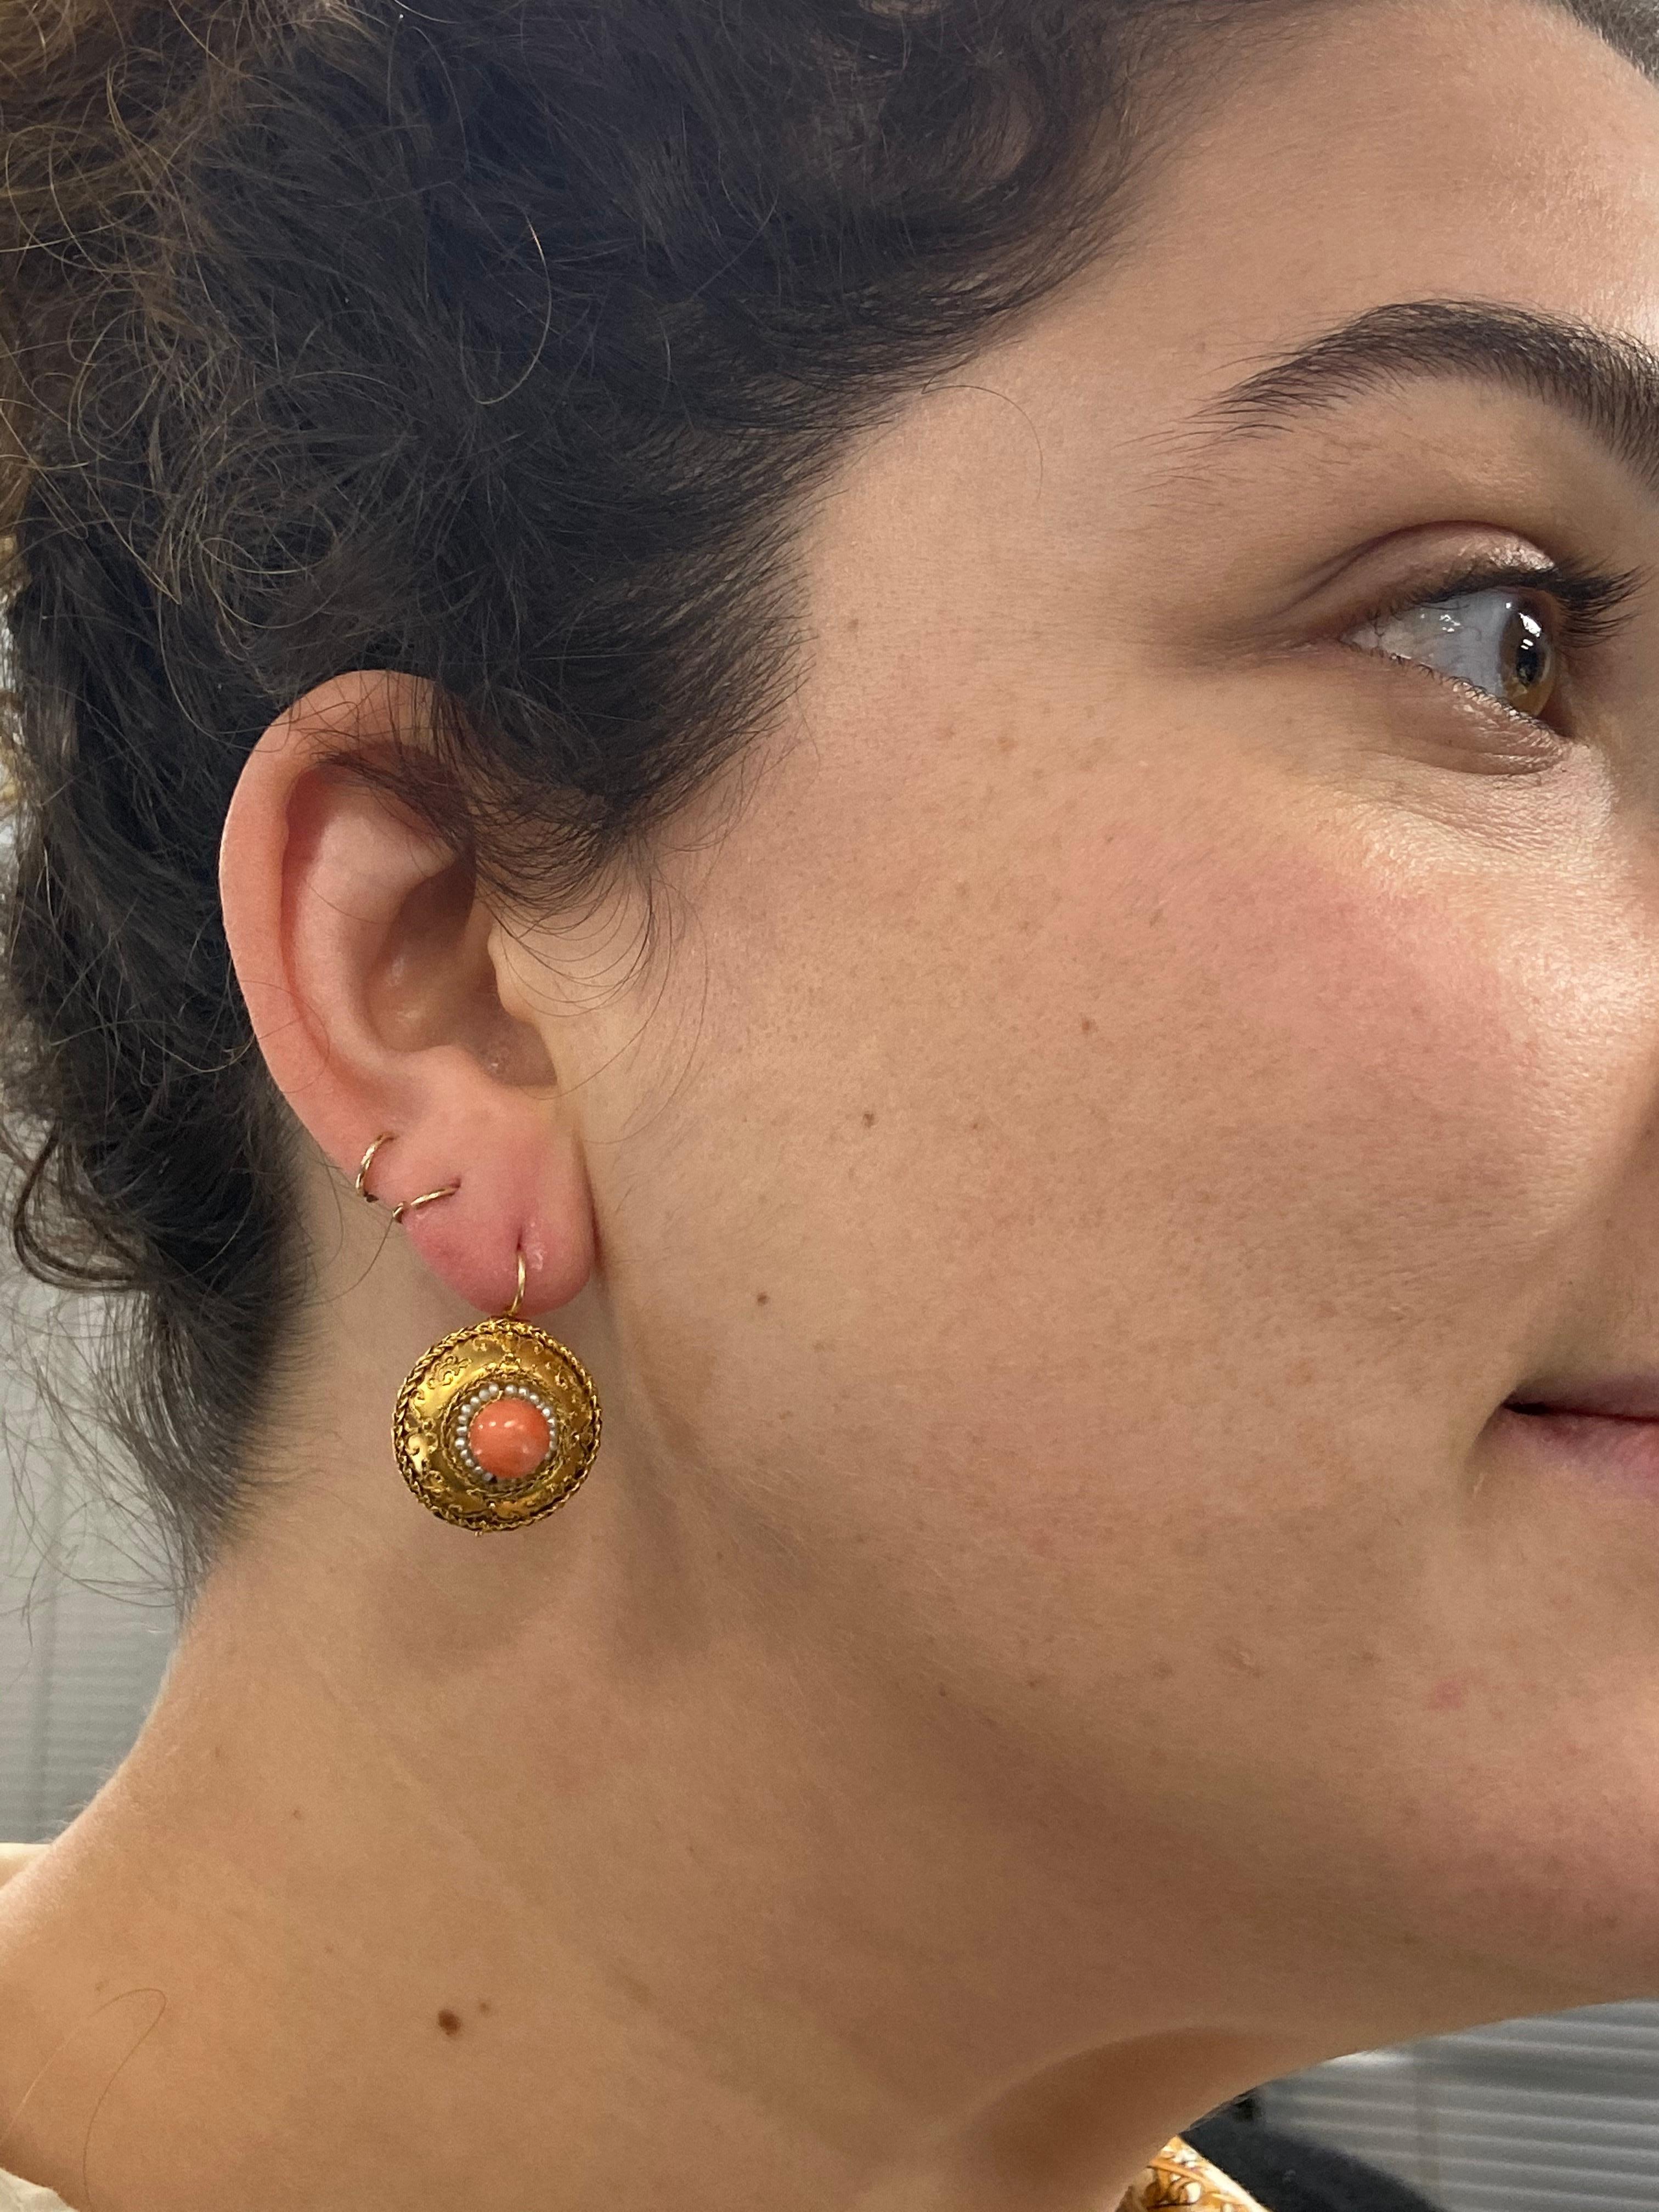 Etruscan Revival Gold Coral and Seed Pearl Pendant Earrings, circa 1860s

These earrings are a lovely example of Etruscan Revival jewelry. They are set with a central cabochon coral in a seed pearl surround to the intricate gold bead frame, circa